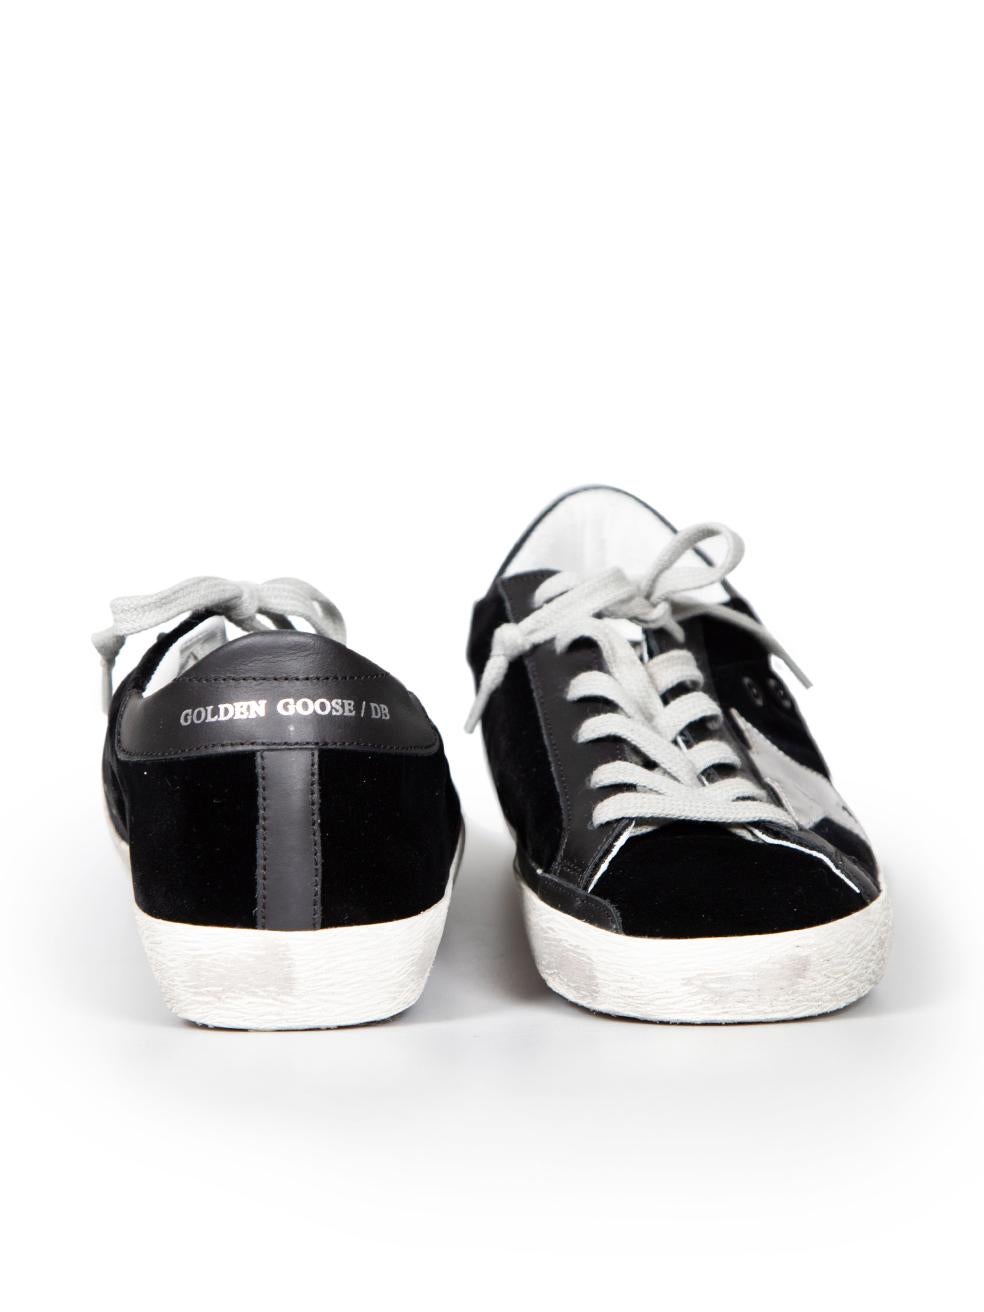 Golden Goose Black Velvet Superstar Lace-Up Trainers Size EU 37 In New Condition For Sale In London, GB